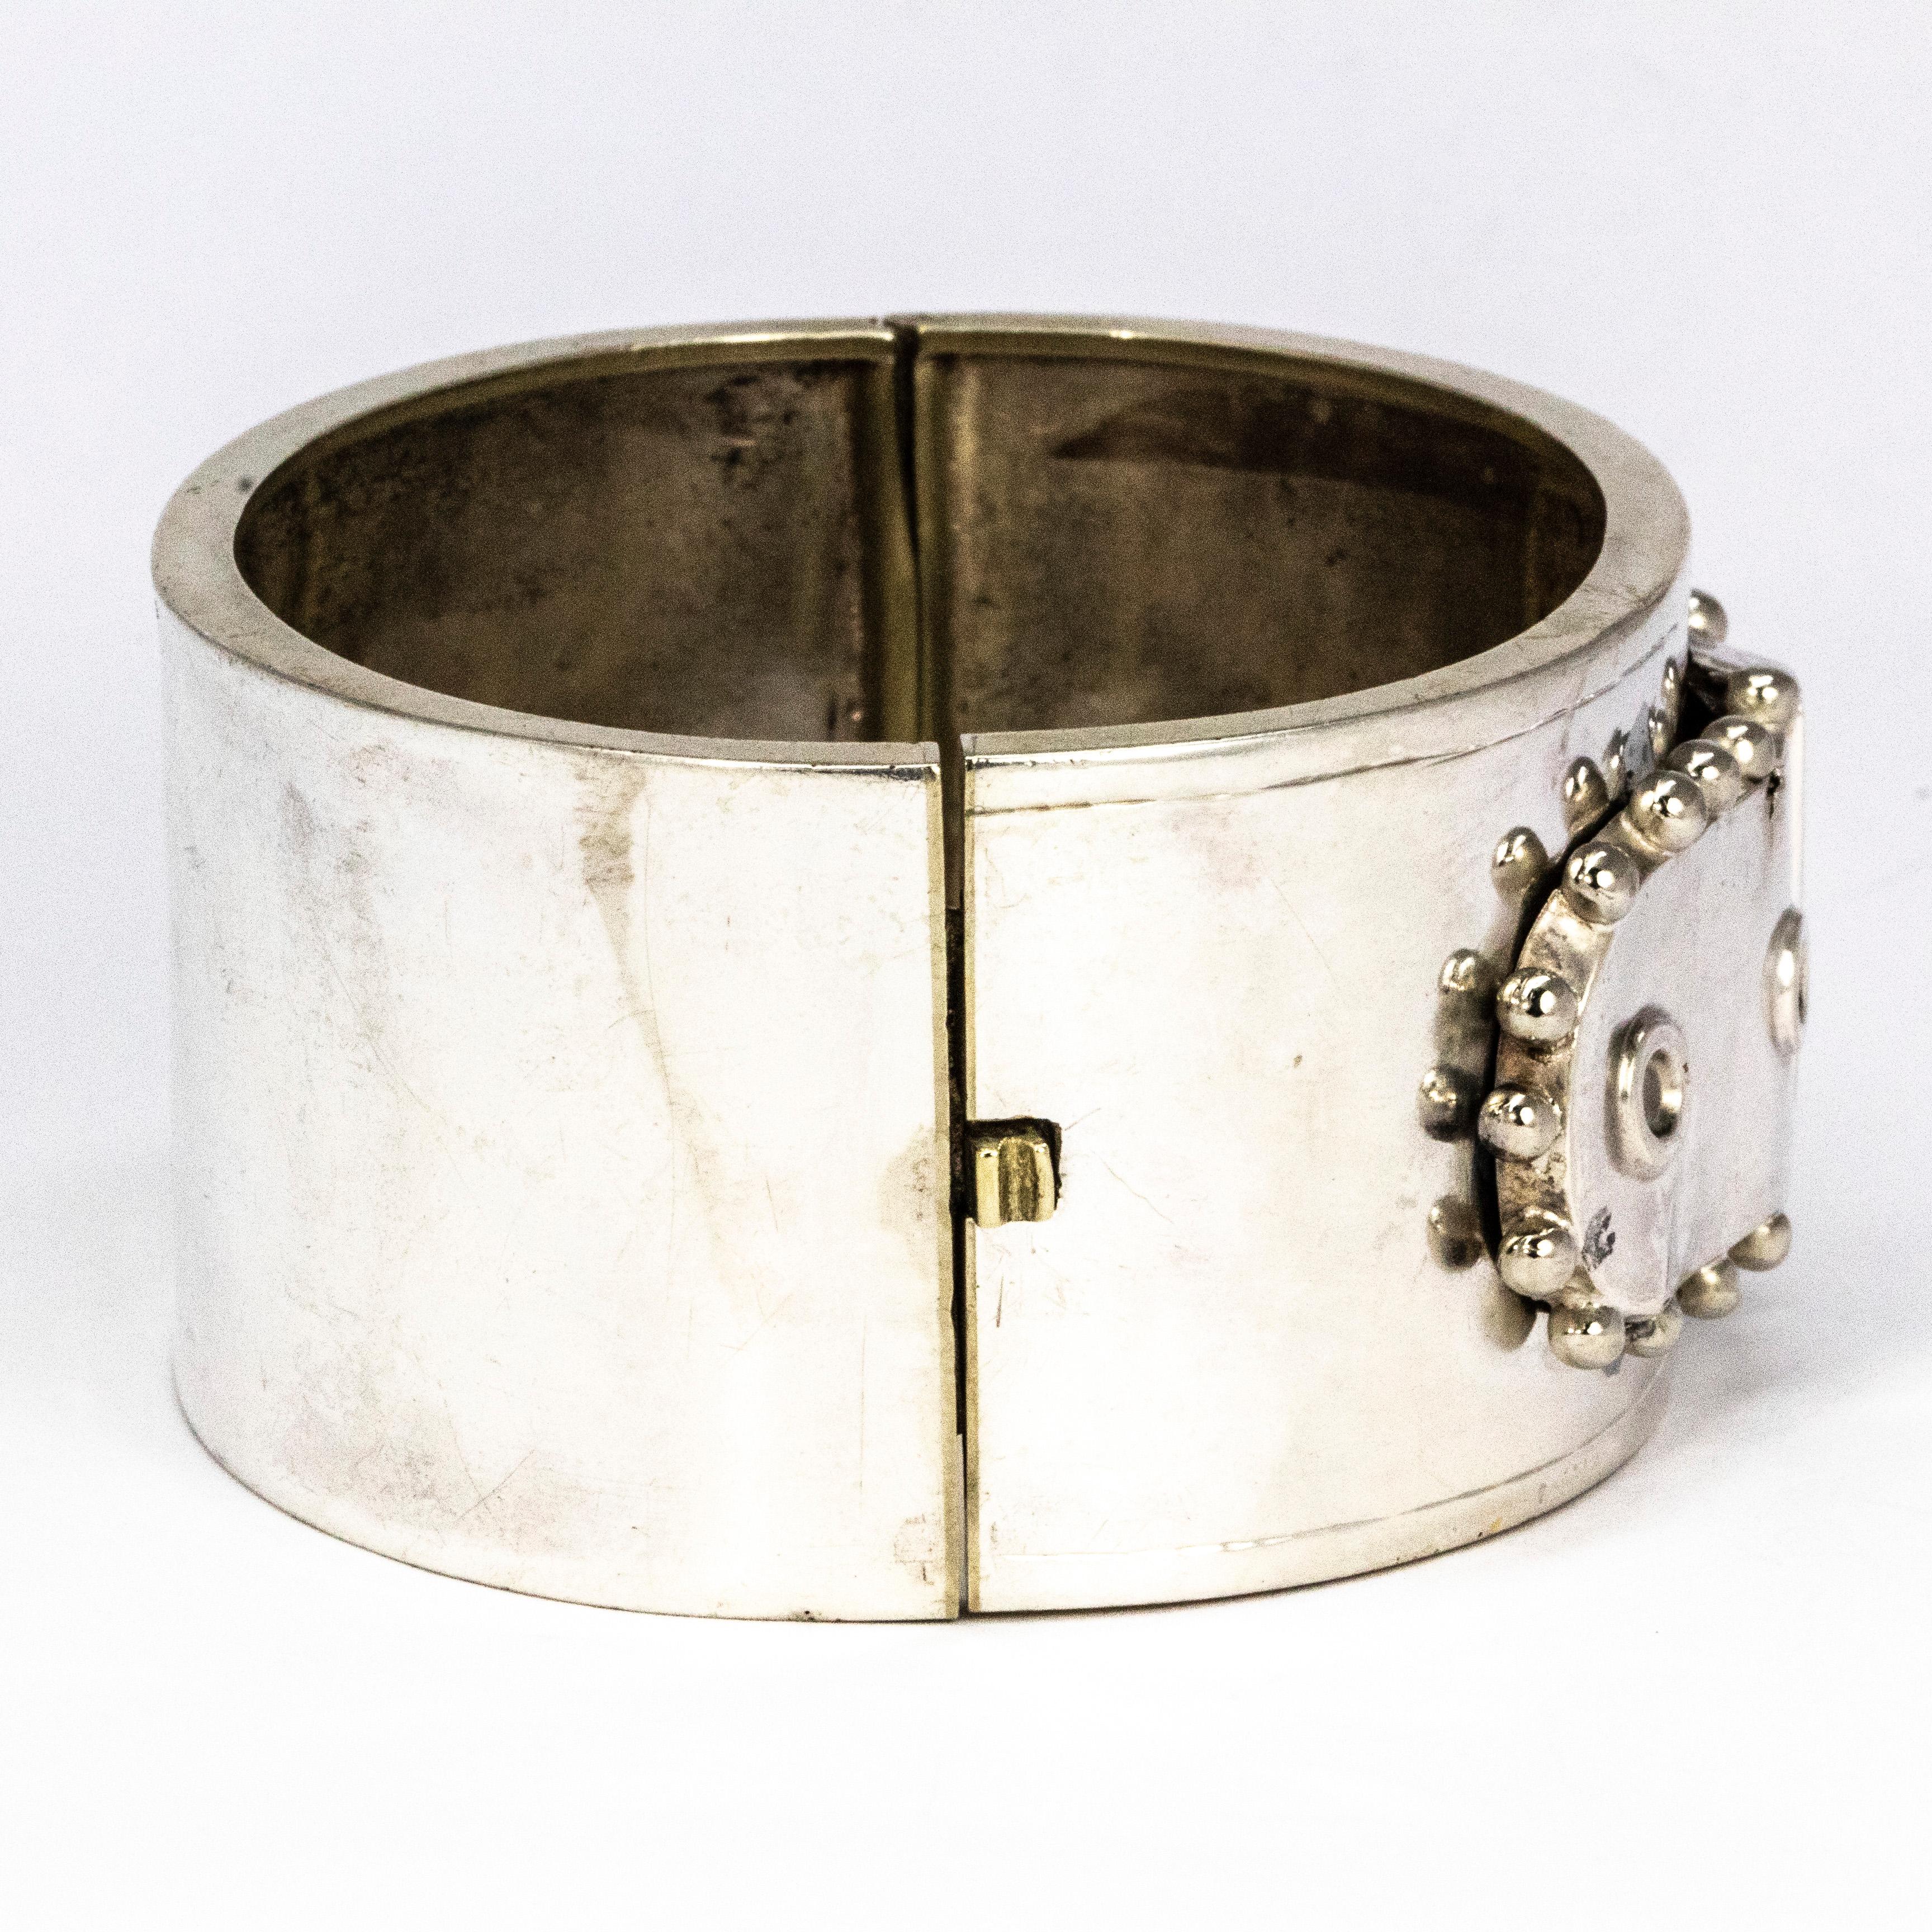 This silver cuff bangle has gorgeous movable buckle detail as the main detail. The buckle has beaded detail and the rest of the bangle is wonderfully plain and glossy. 

Inner Bangle Diameter: 55mm 